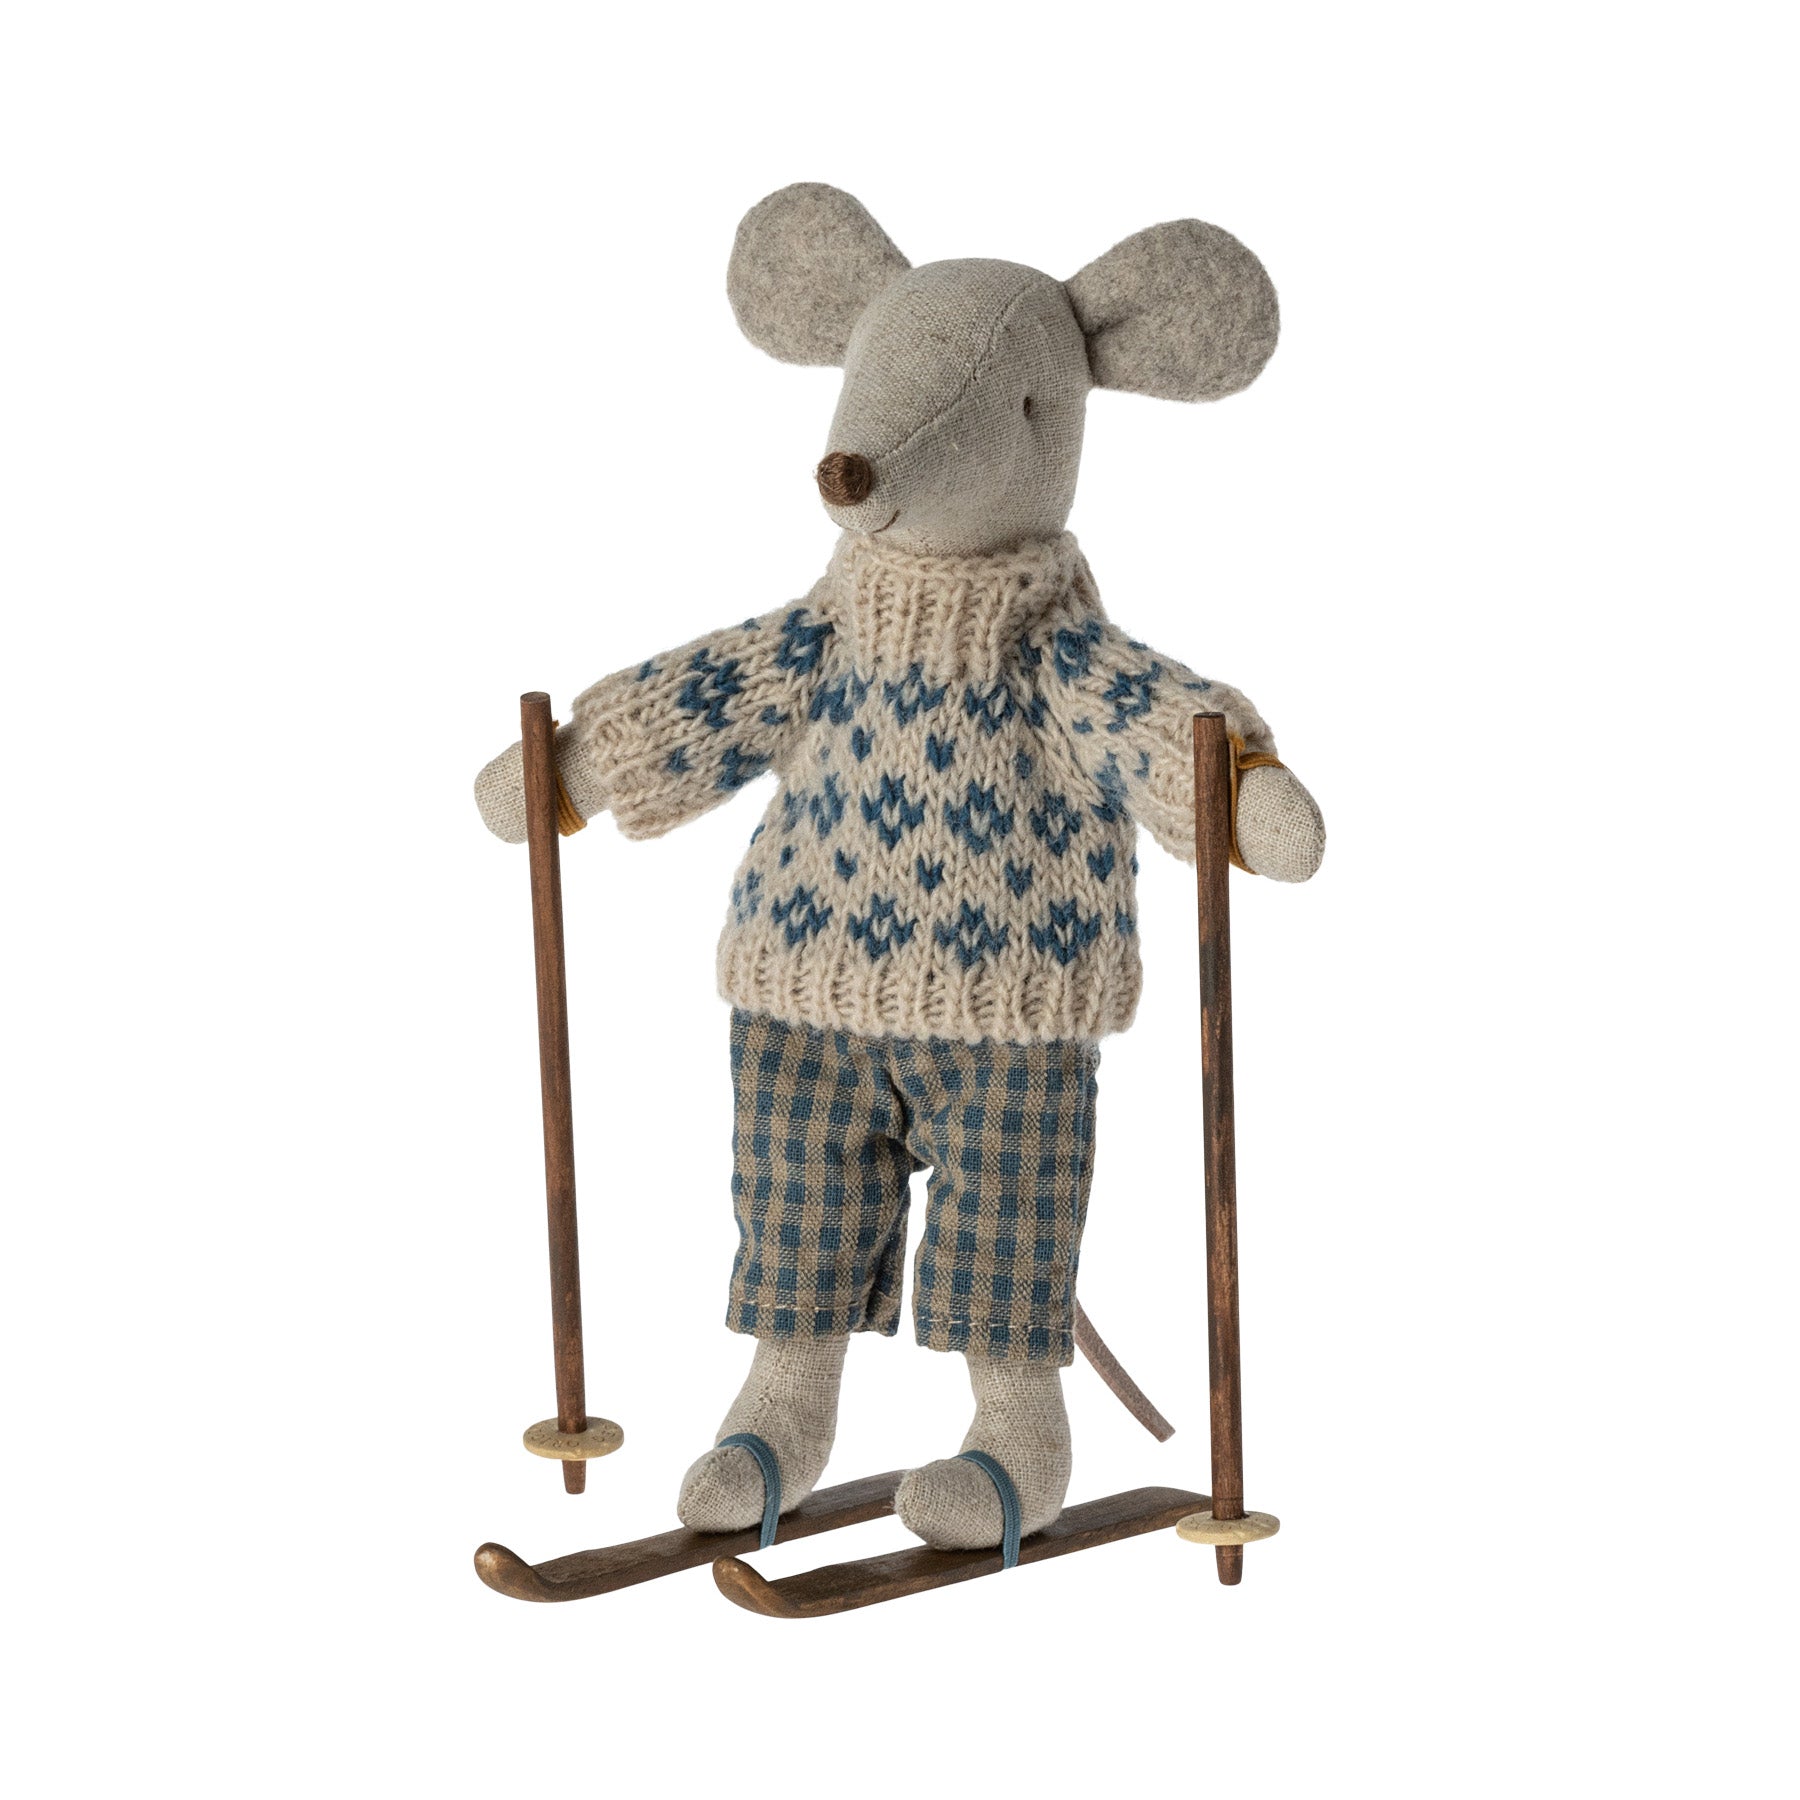 maileg winter ski dad mouse in a cream patterned jumper, blue check trousers, standing on wooden skis holding ski poles